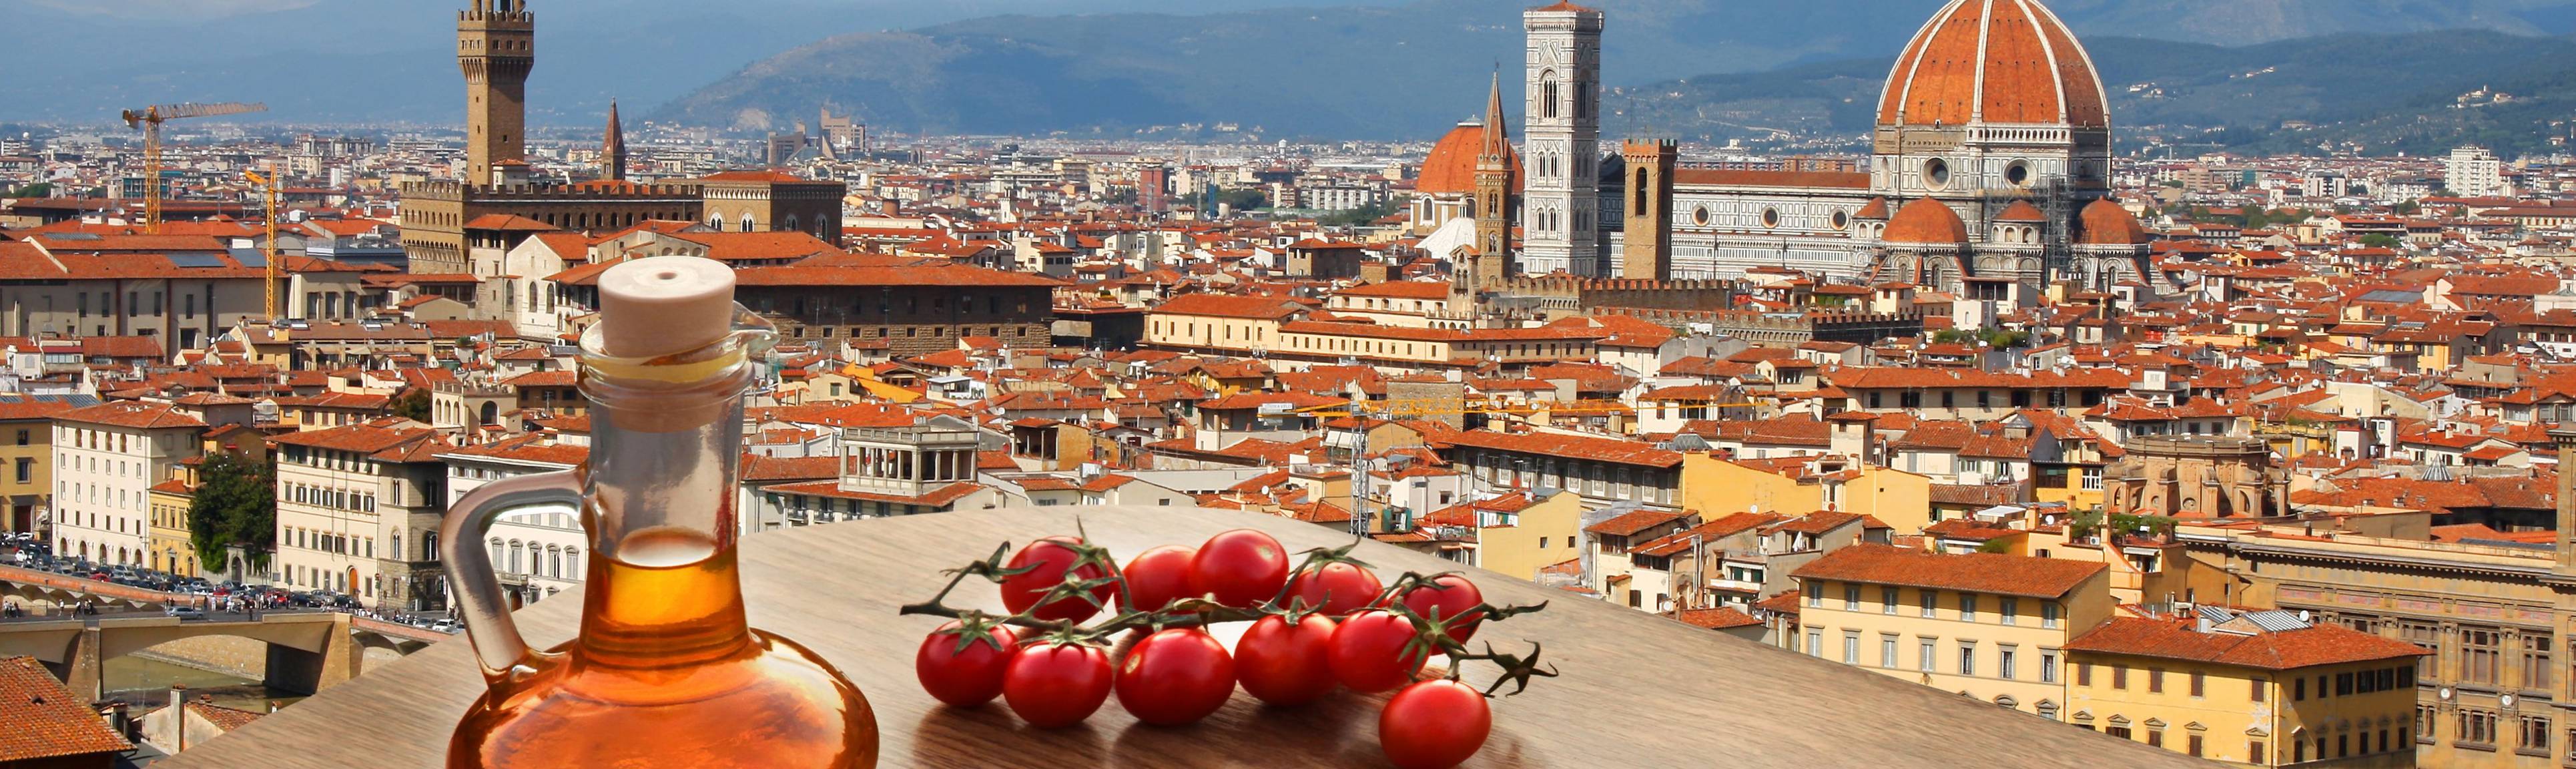 Tomatoes & olive oil on a table overlooking the rooftops of Florence